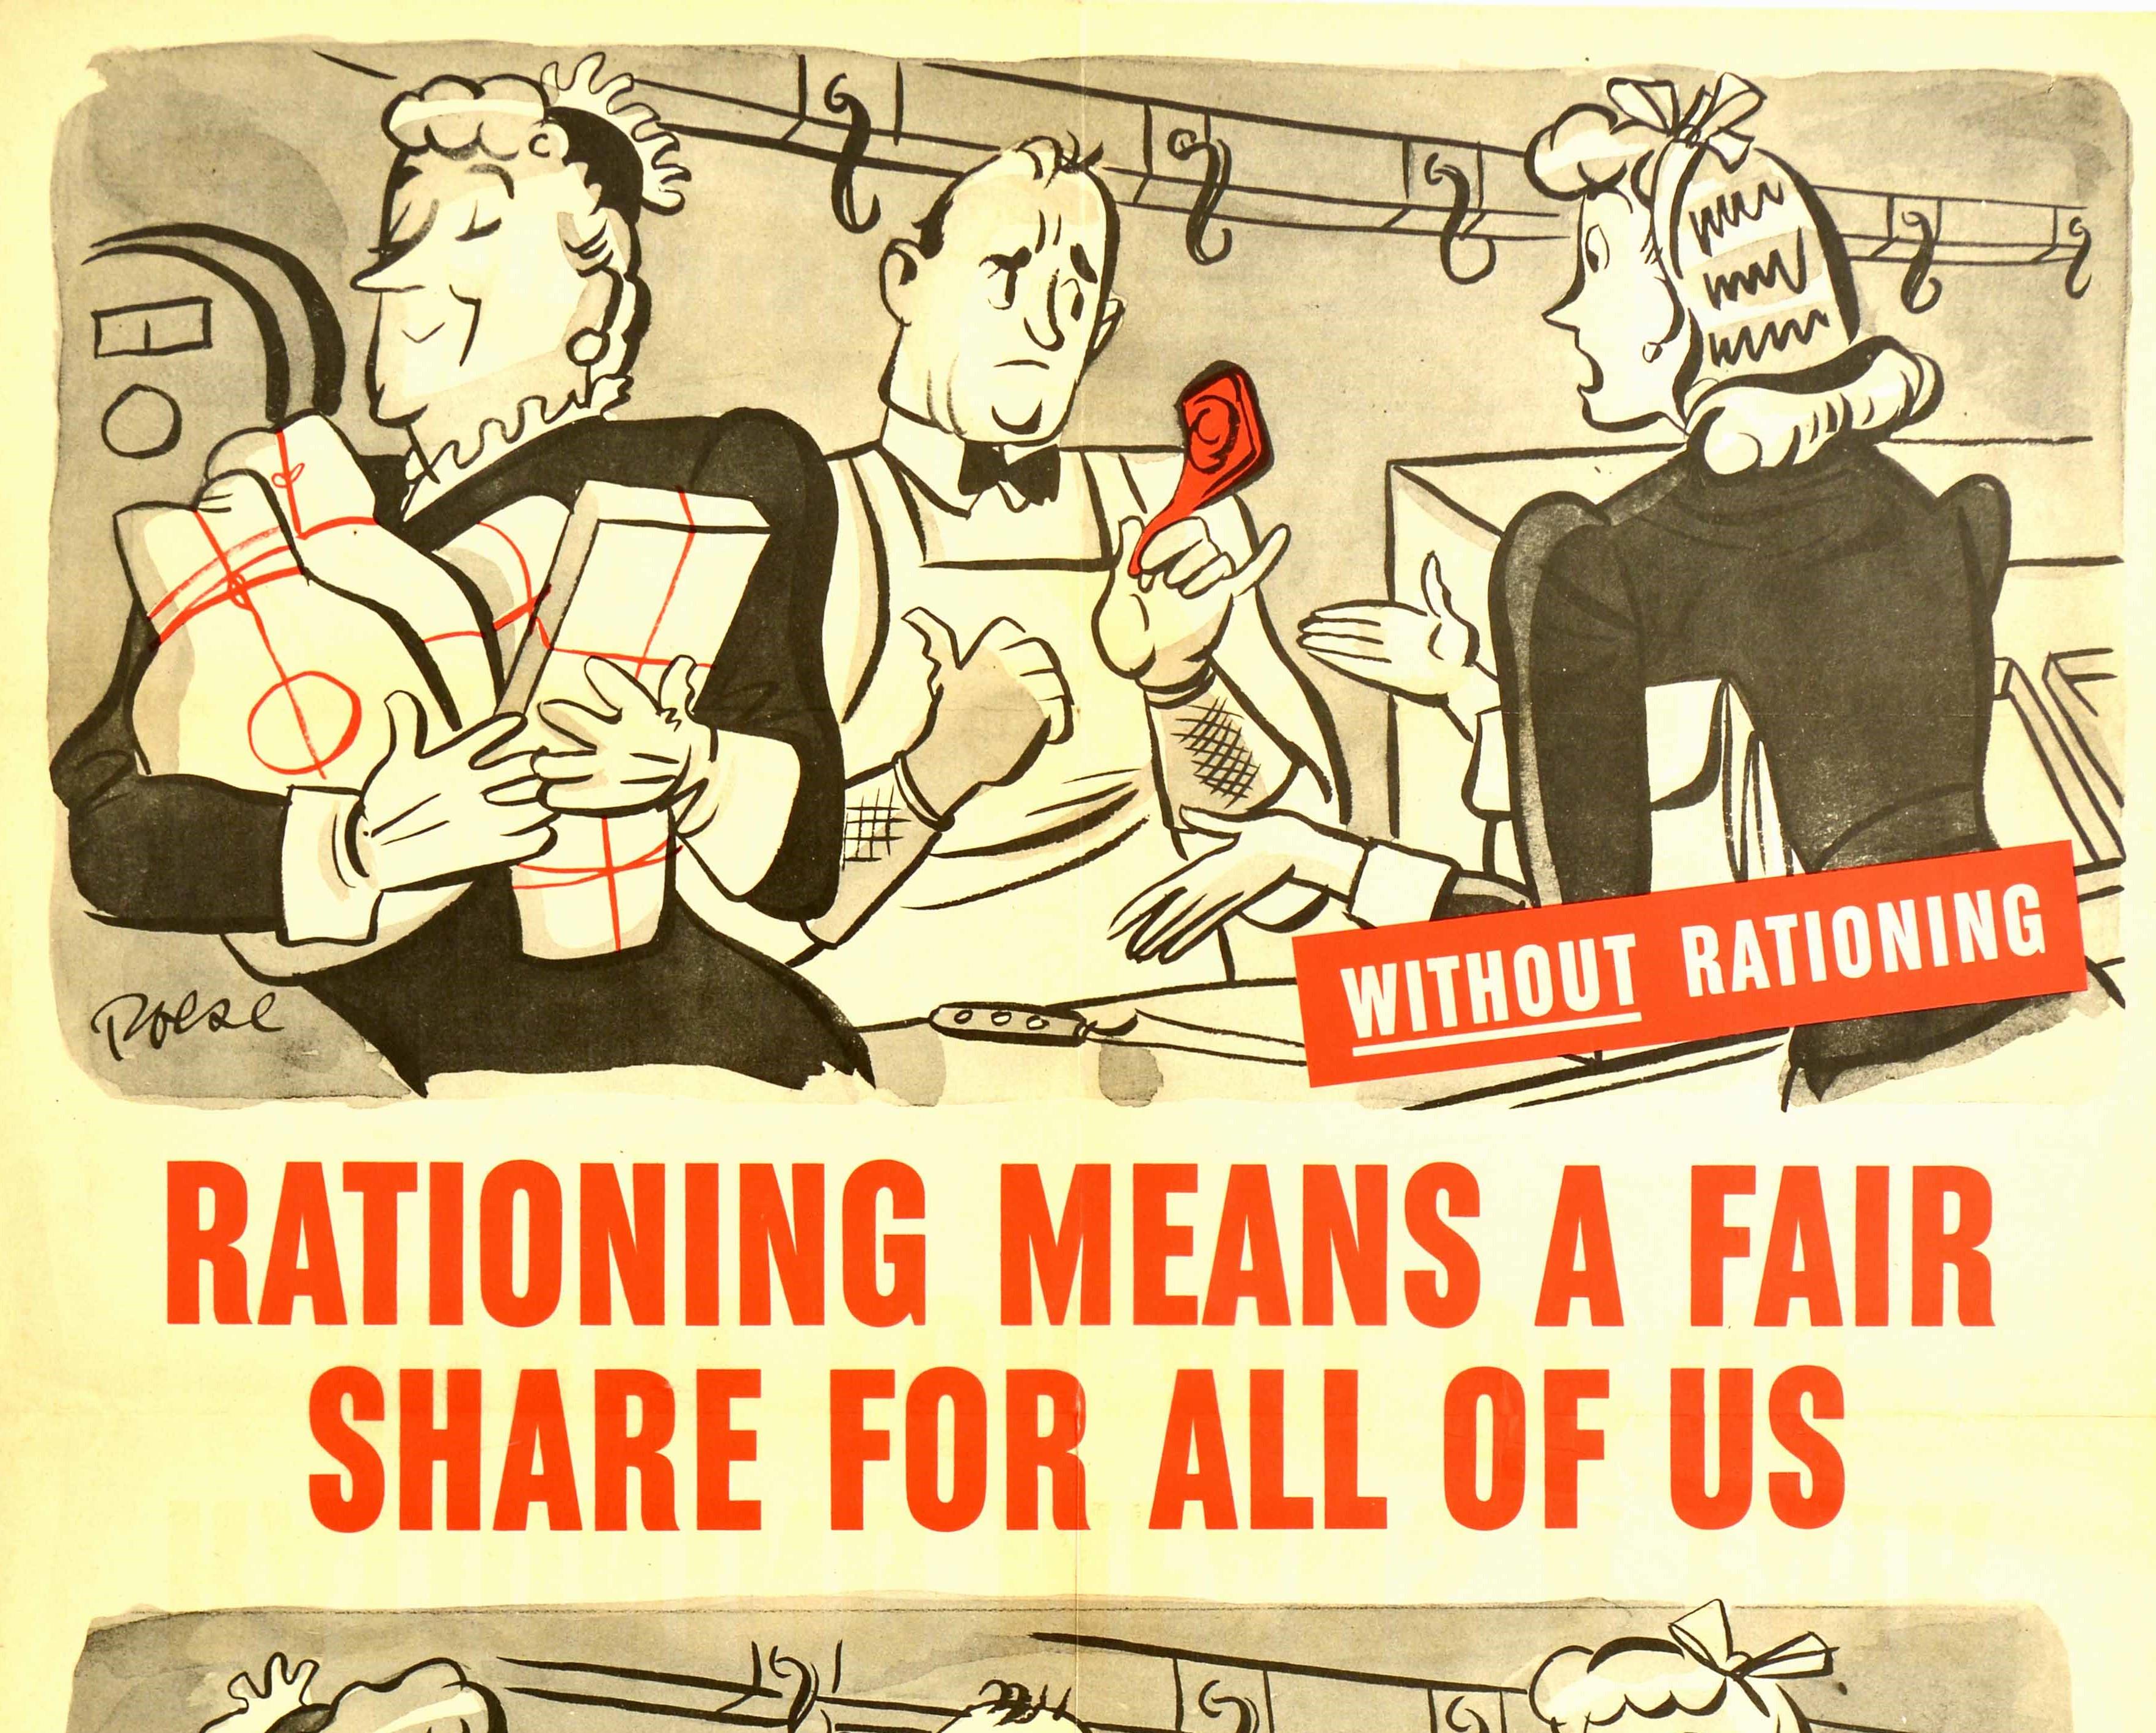 Original vintage American World War Two home front propaganda poster - Rationing means a fair share for all of us - issued by the Office of Price Administration (1941-1947) Washington D.C. featuring two cartoon illustrations showing the outcome of a